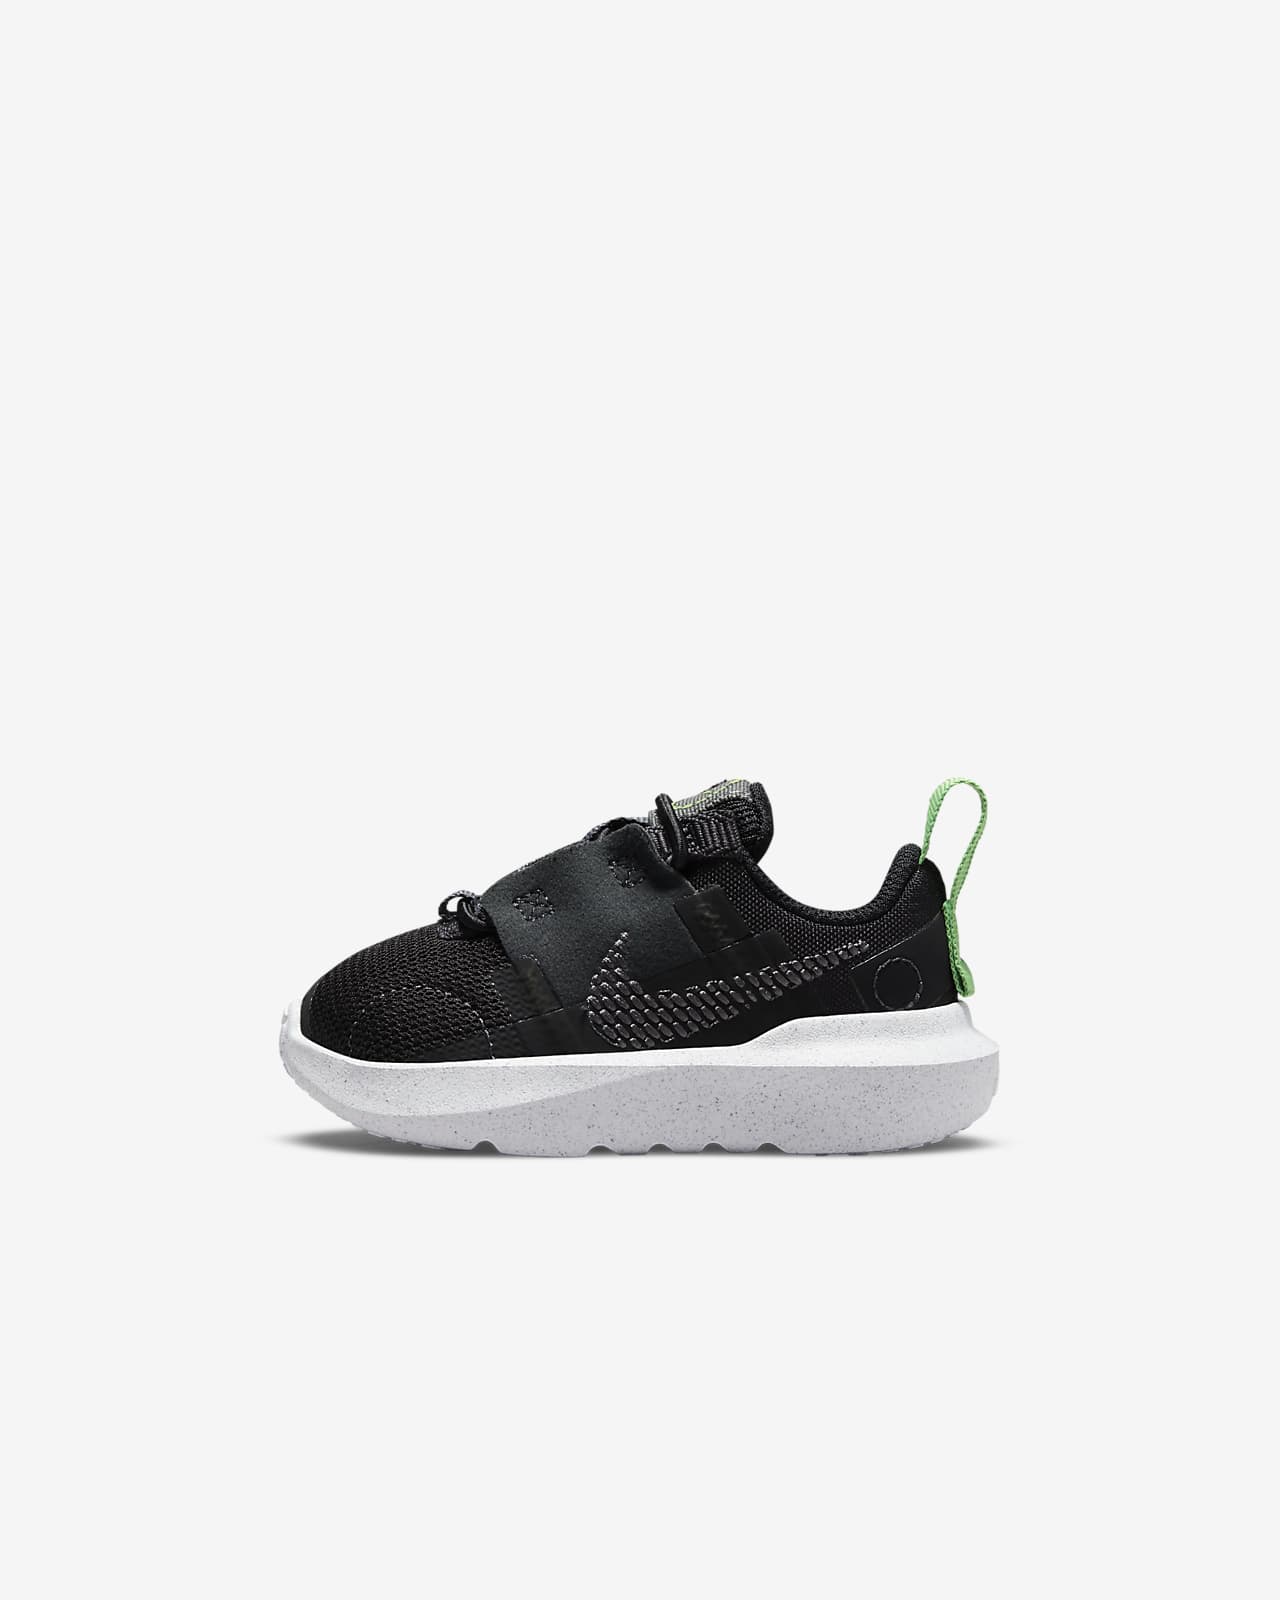 Nike Crater Impact Baby & Toddler Shoes